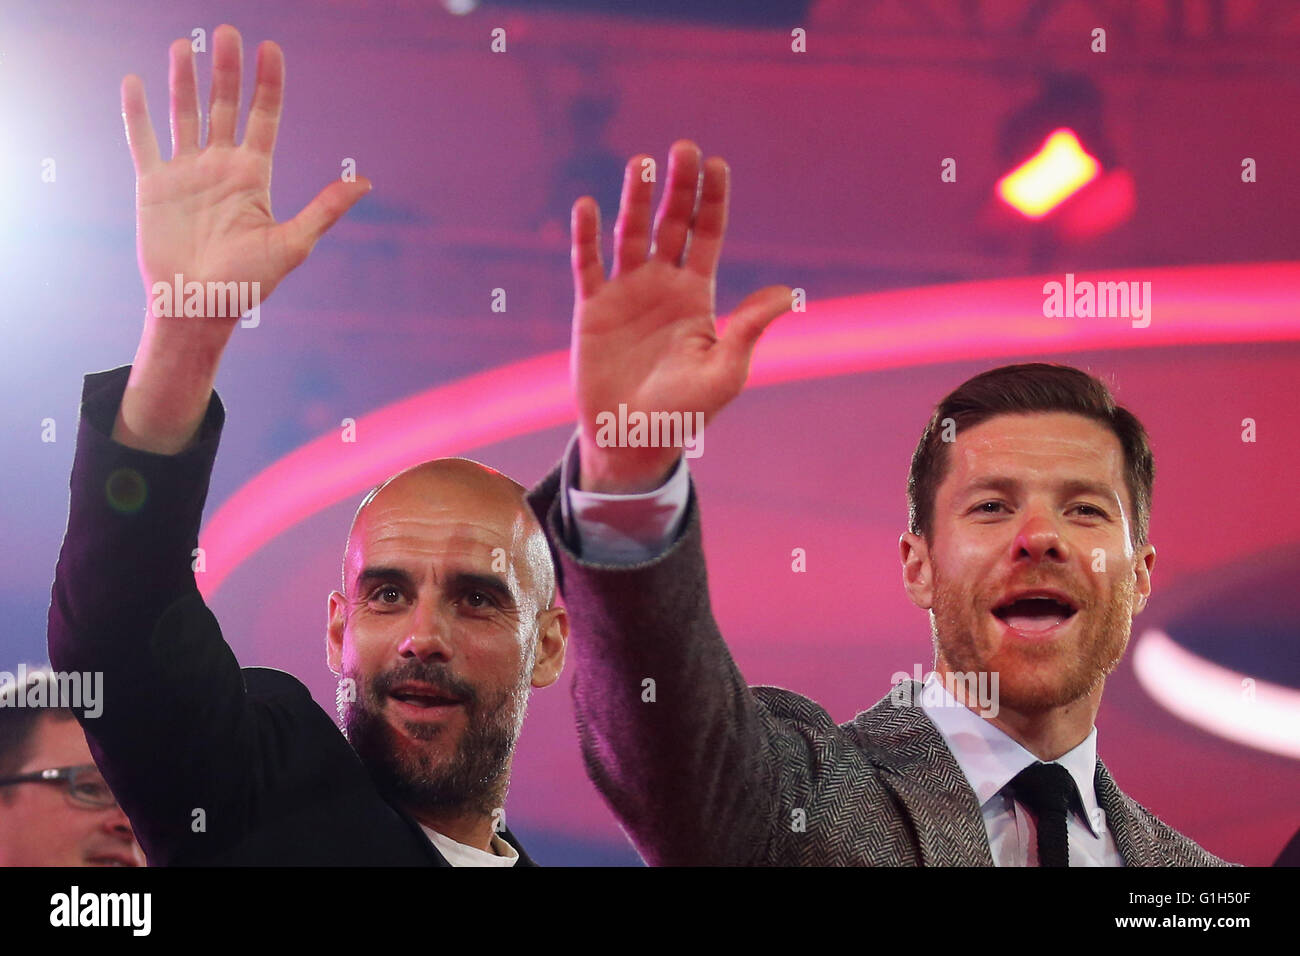 Munich, Germany. 14th May, 2016. Head Coach, Pep Guardiola (L) and Xabi Alonso wave on stage during the FC Bayern Muenchen Bundesliga Champions Dinner at the Postpalast on May 14, 2016 in Munich, Bavaria. Stock Photo